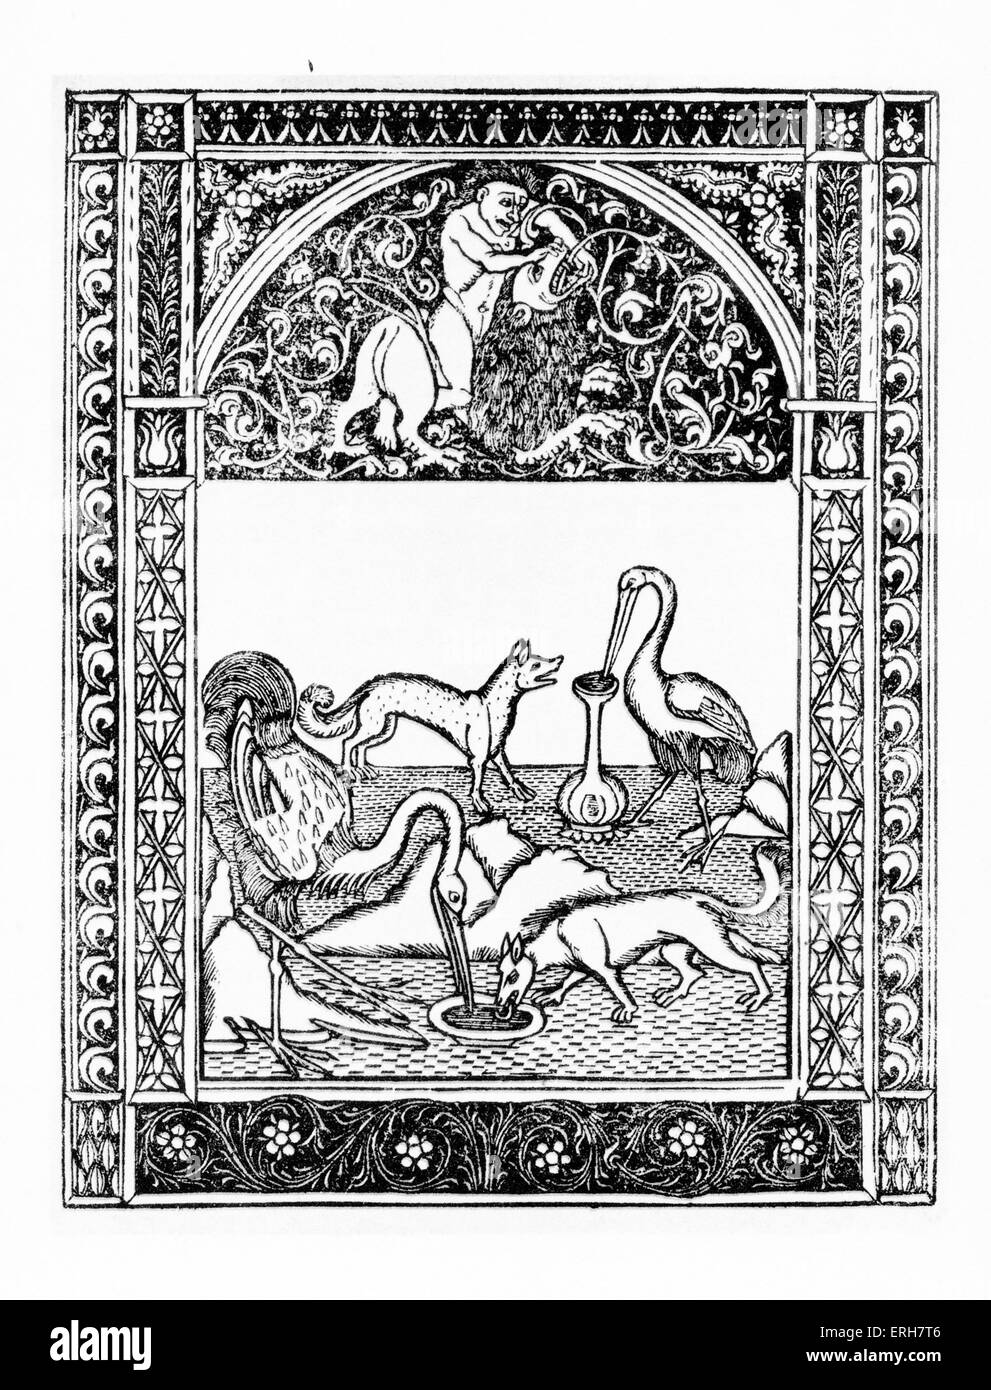 Aesop 's fables: the Fox and the Stork. Illustration after 1485 edition printed in Naples by German printers for Francesco del Stock Photo